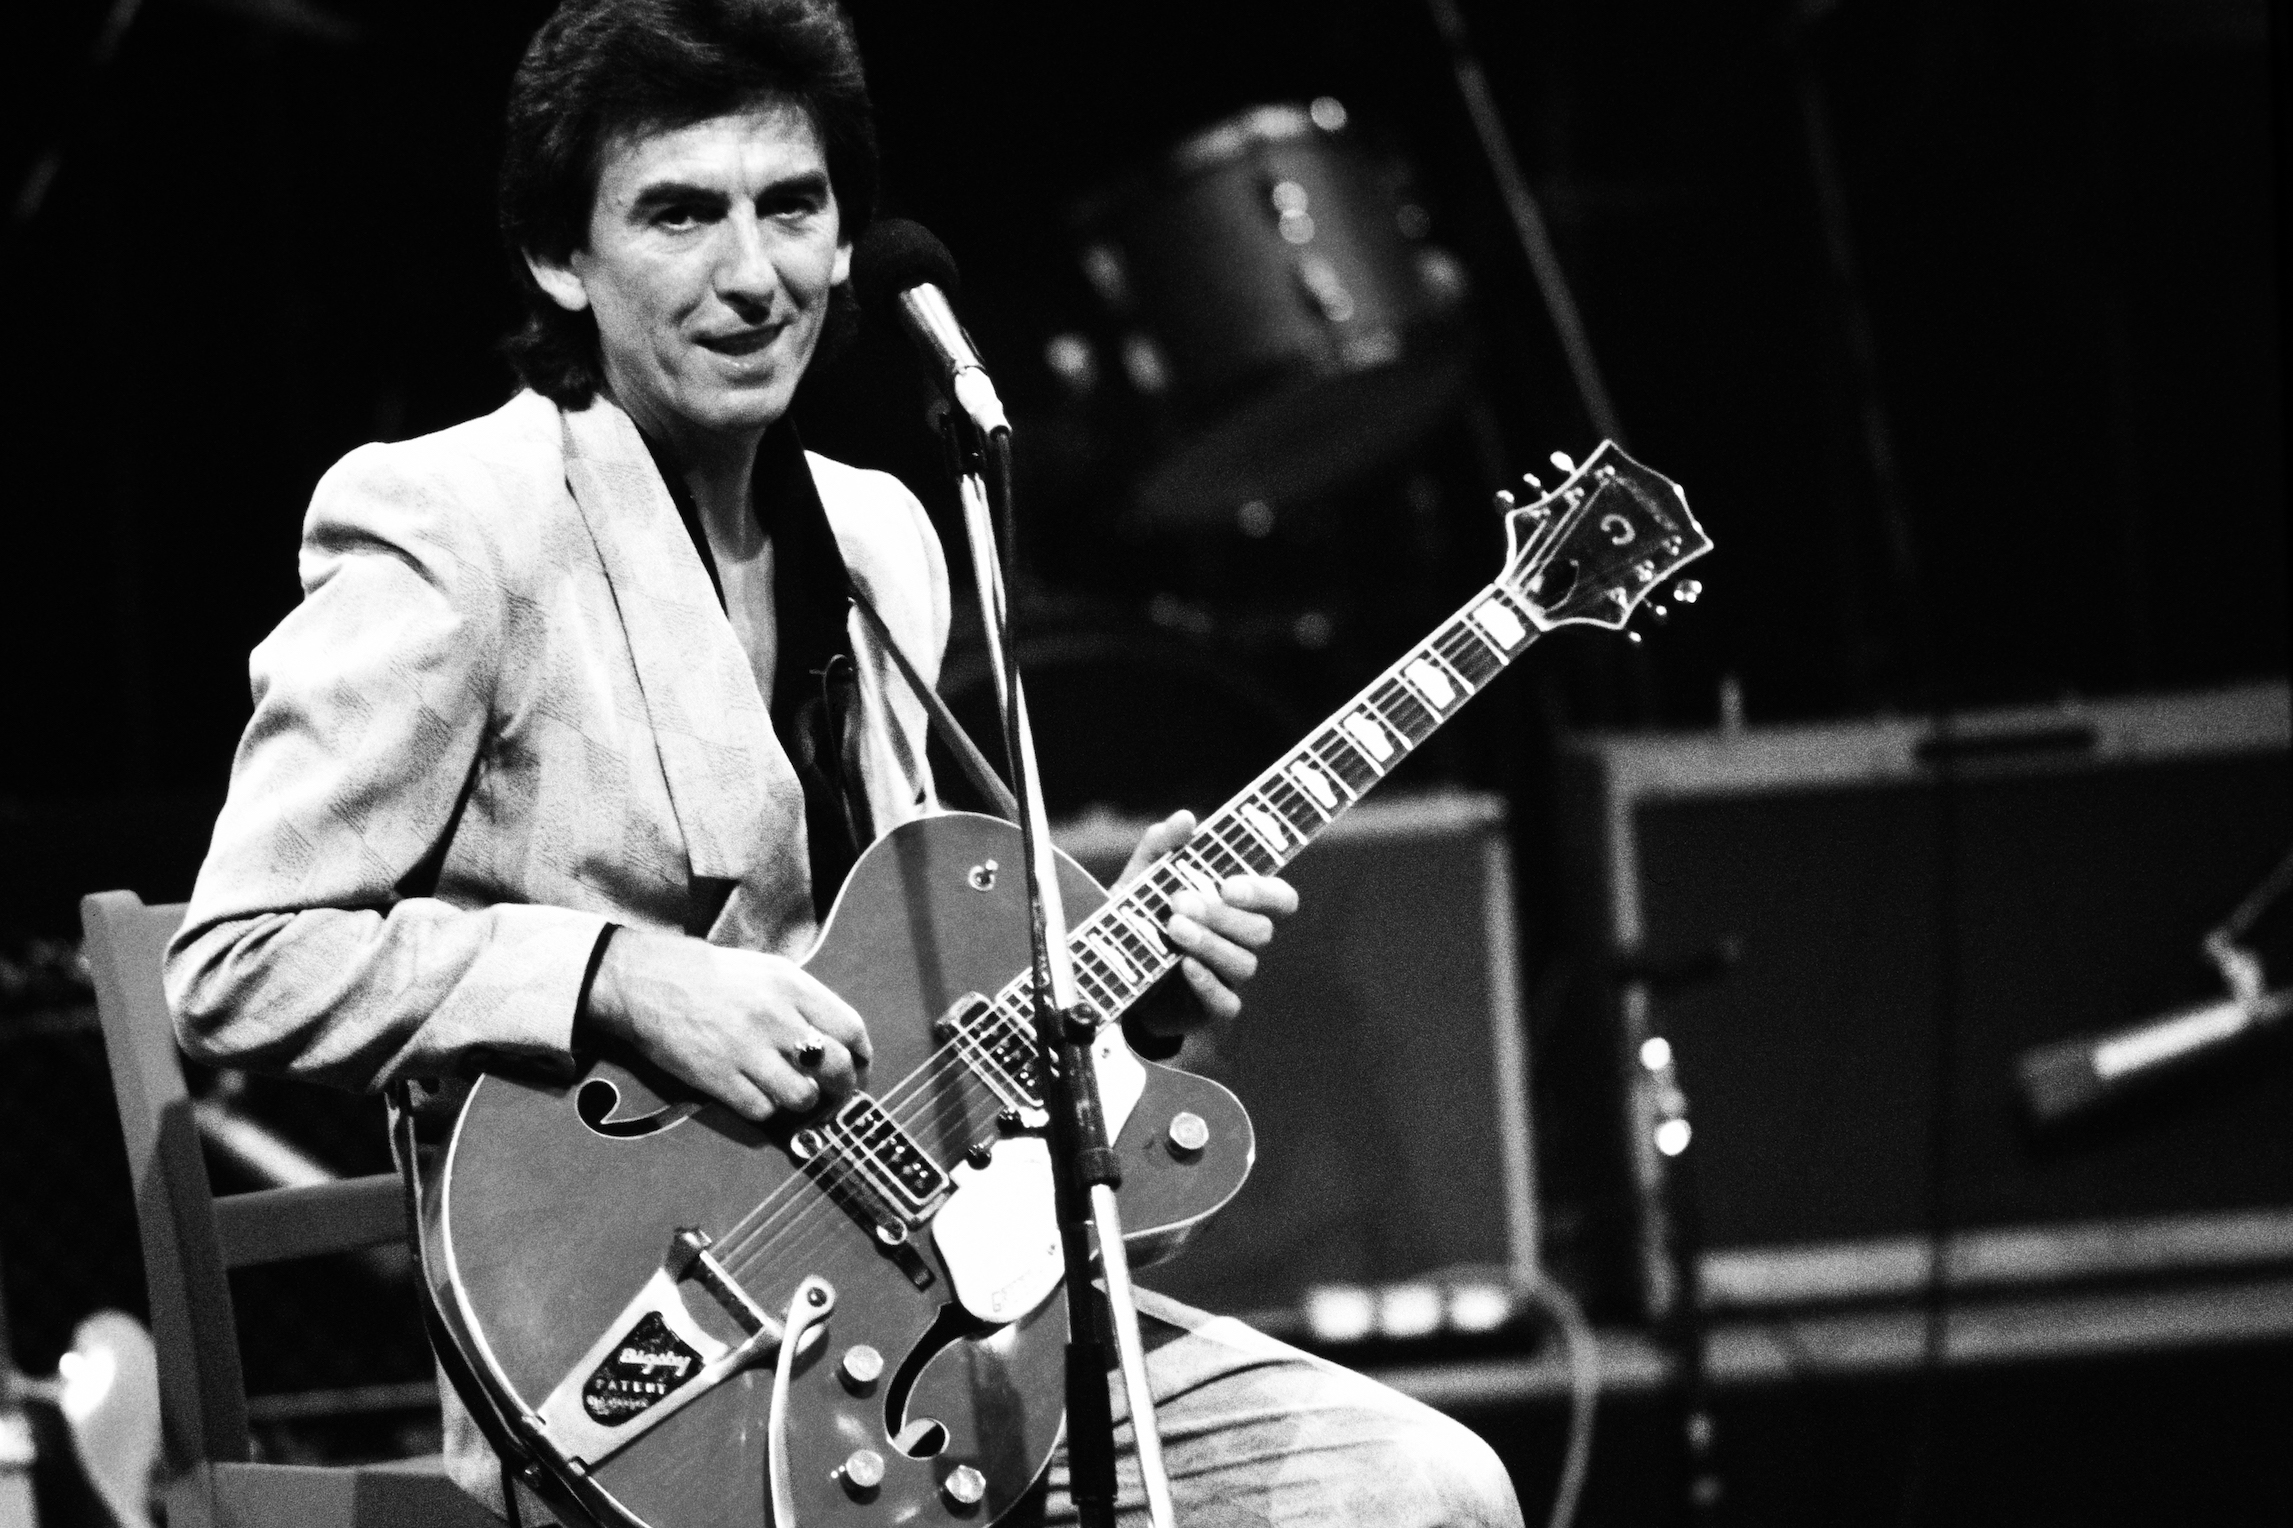 George Harrison of The Beatles performs on stage in 1985